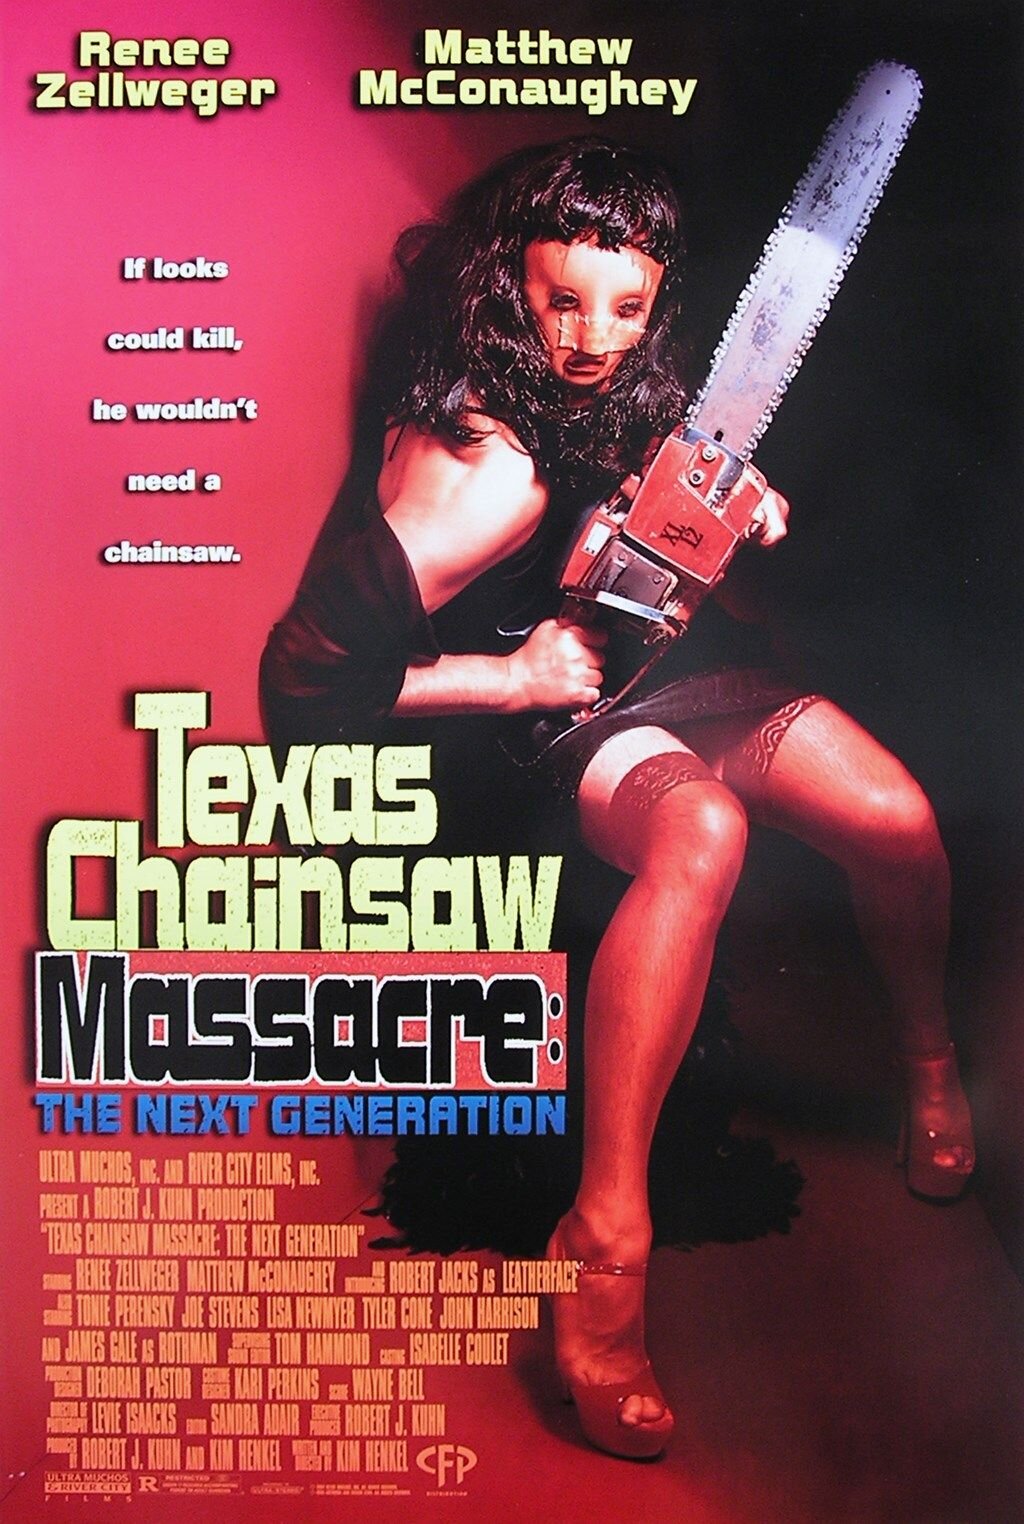 poster - Renee Zellweger Matthew McConaughey If looks could kill, he wouldn't need a chainsaw. Texas Chainsaw Massacre The Next Generation Ultra Muchos, Inc.u River City Films, Inc. Present I Robert J. Kuhn Production "Texas Chainsaw Massacre The Next Gen